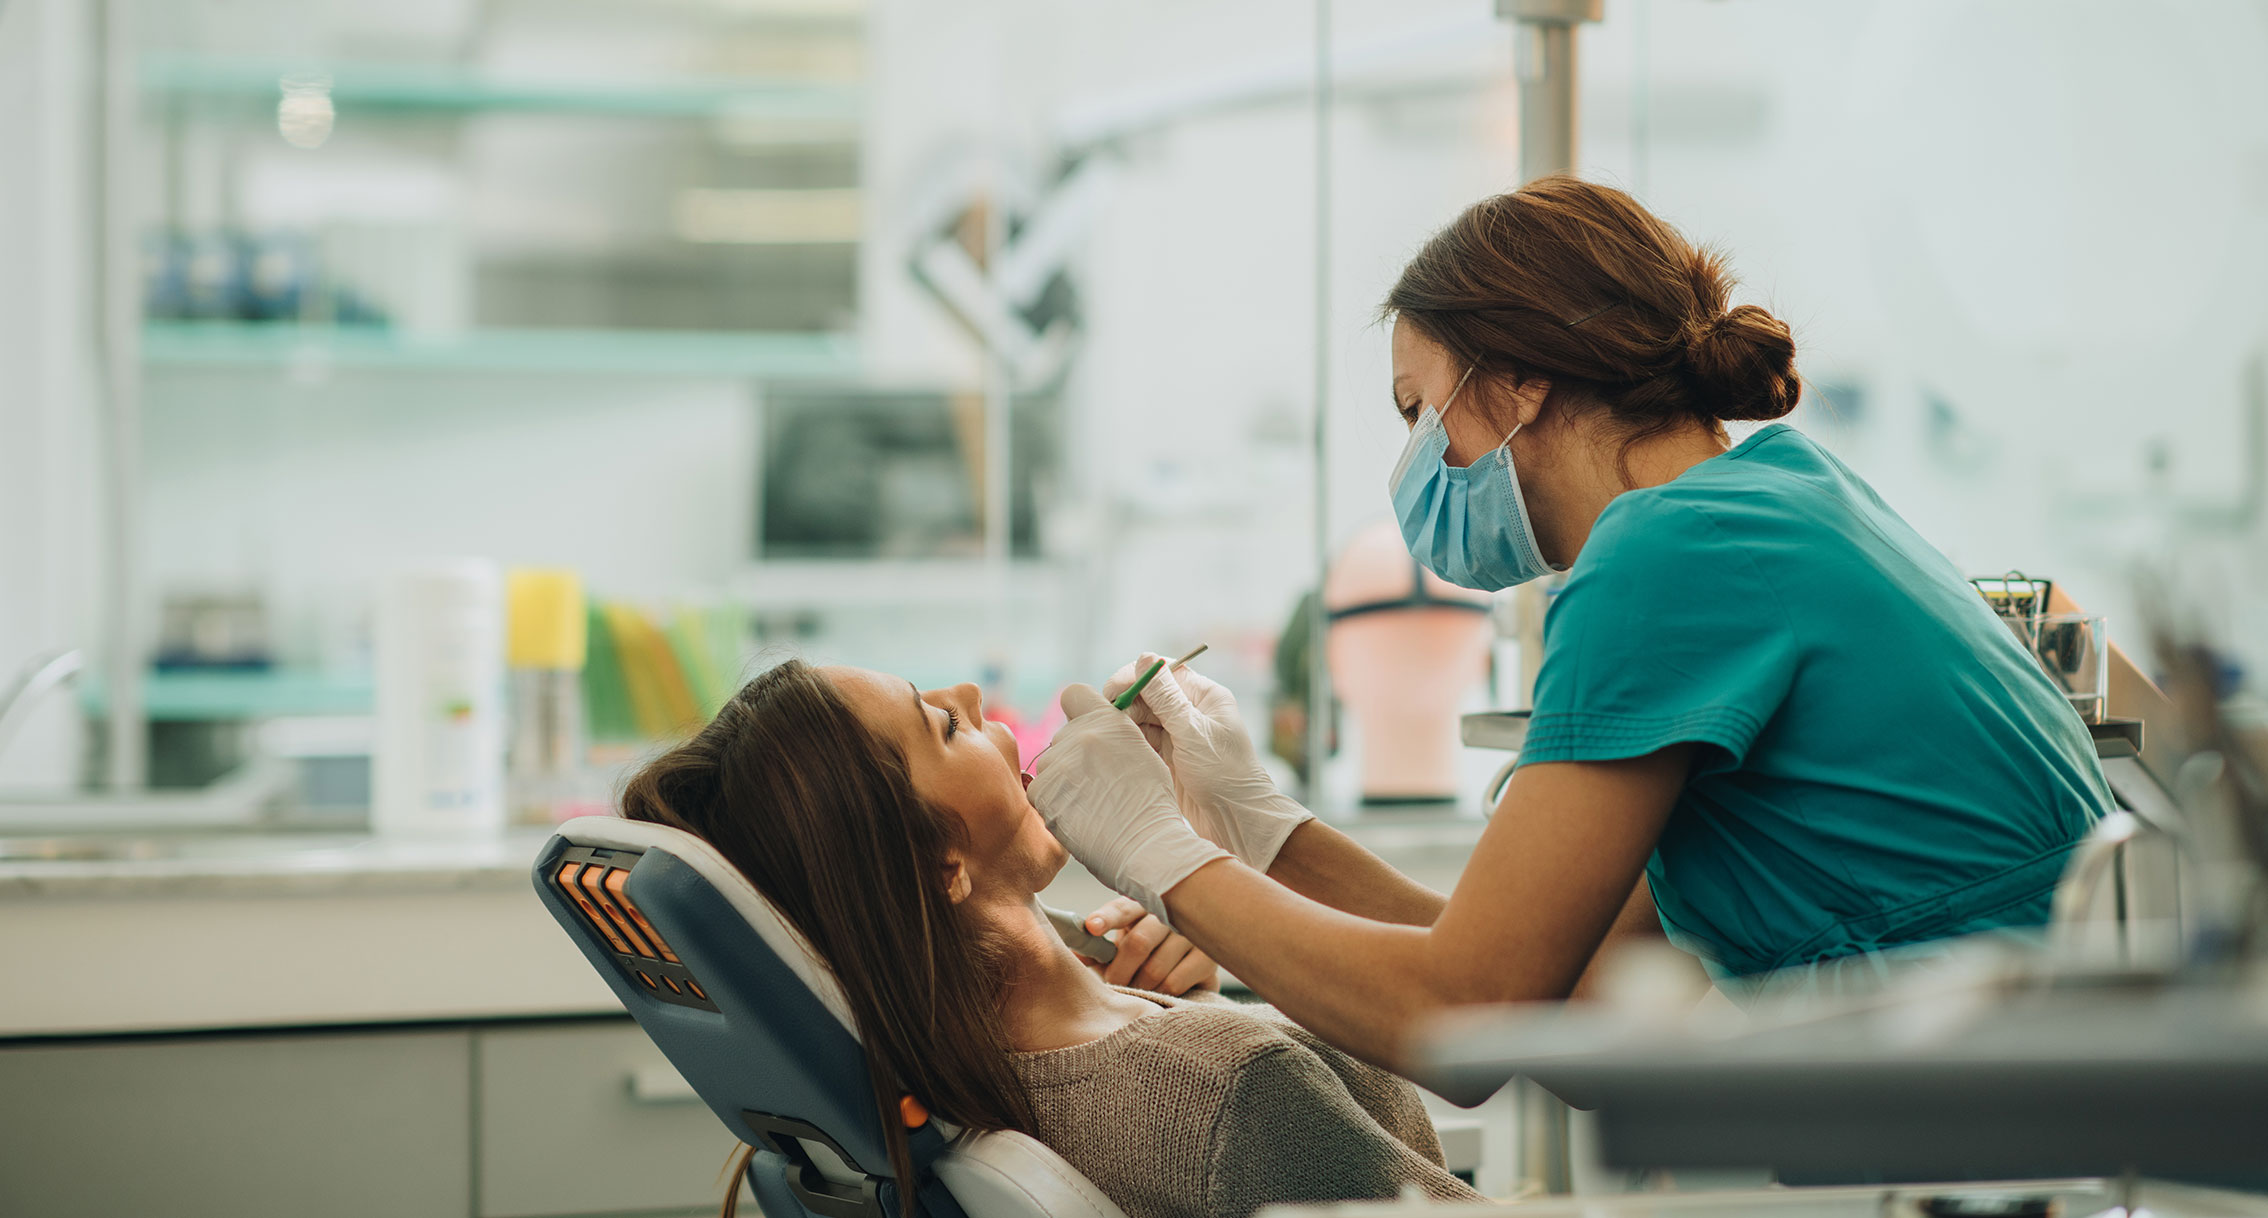 CDC Issues Updated Guidance to Dental Practices after Meeting with AAO